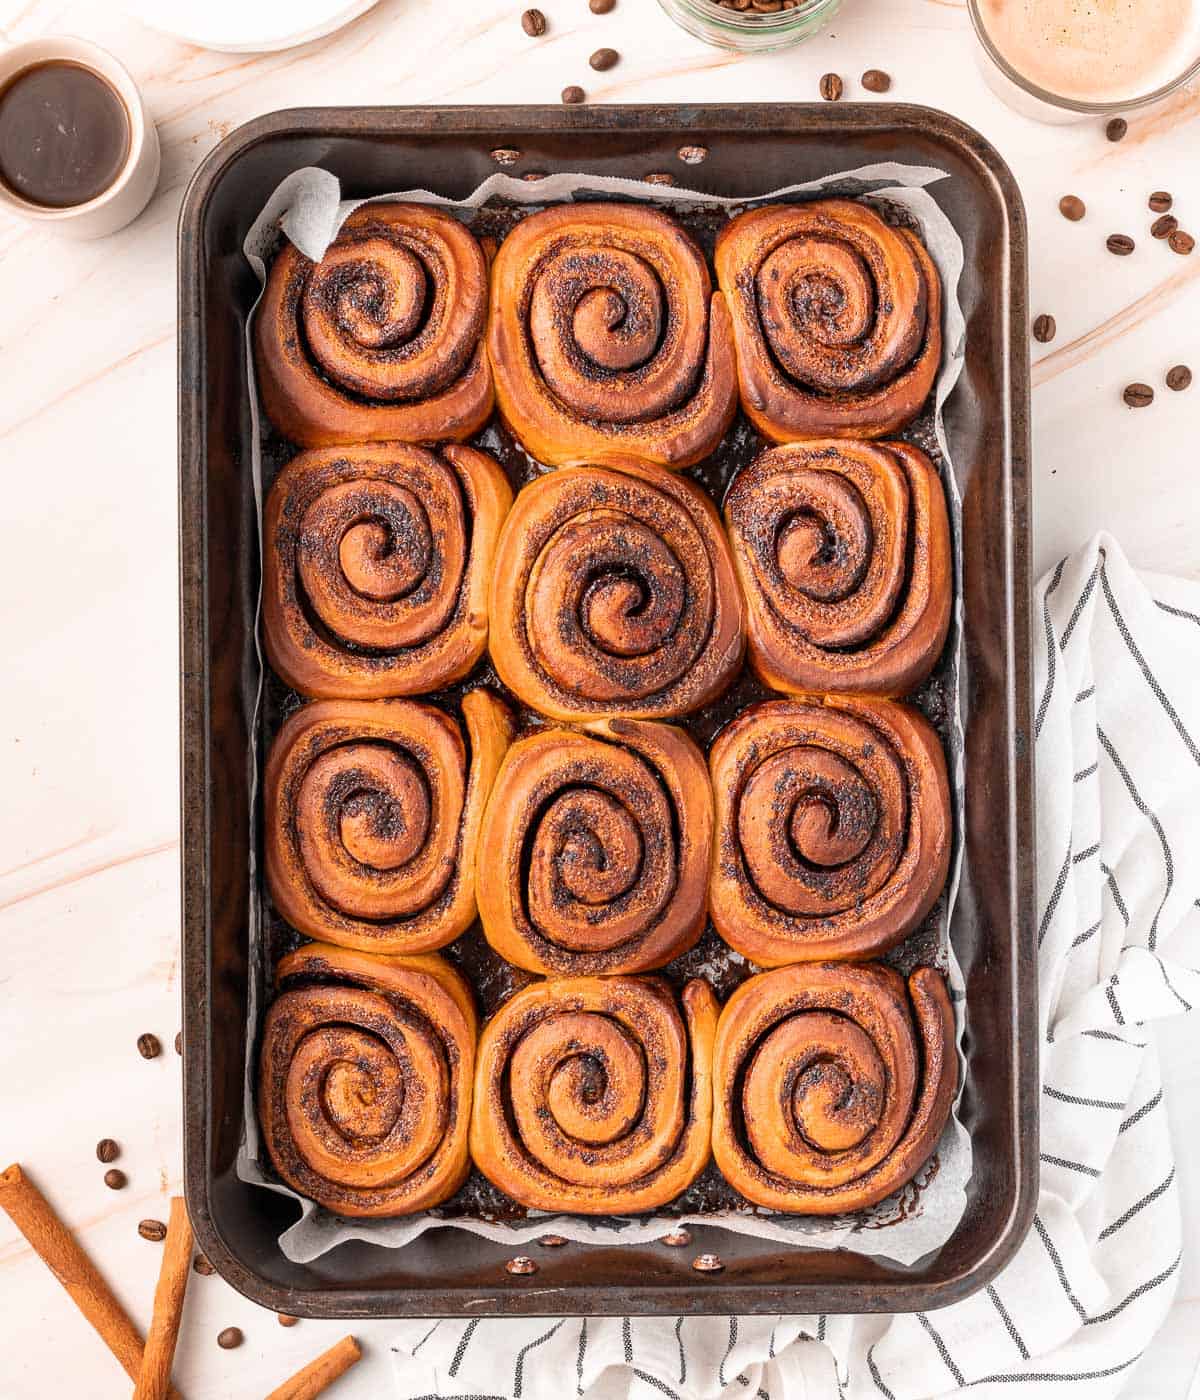 Baked rolls in the roasting tray seen from above.